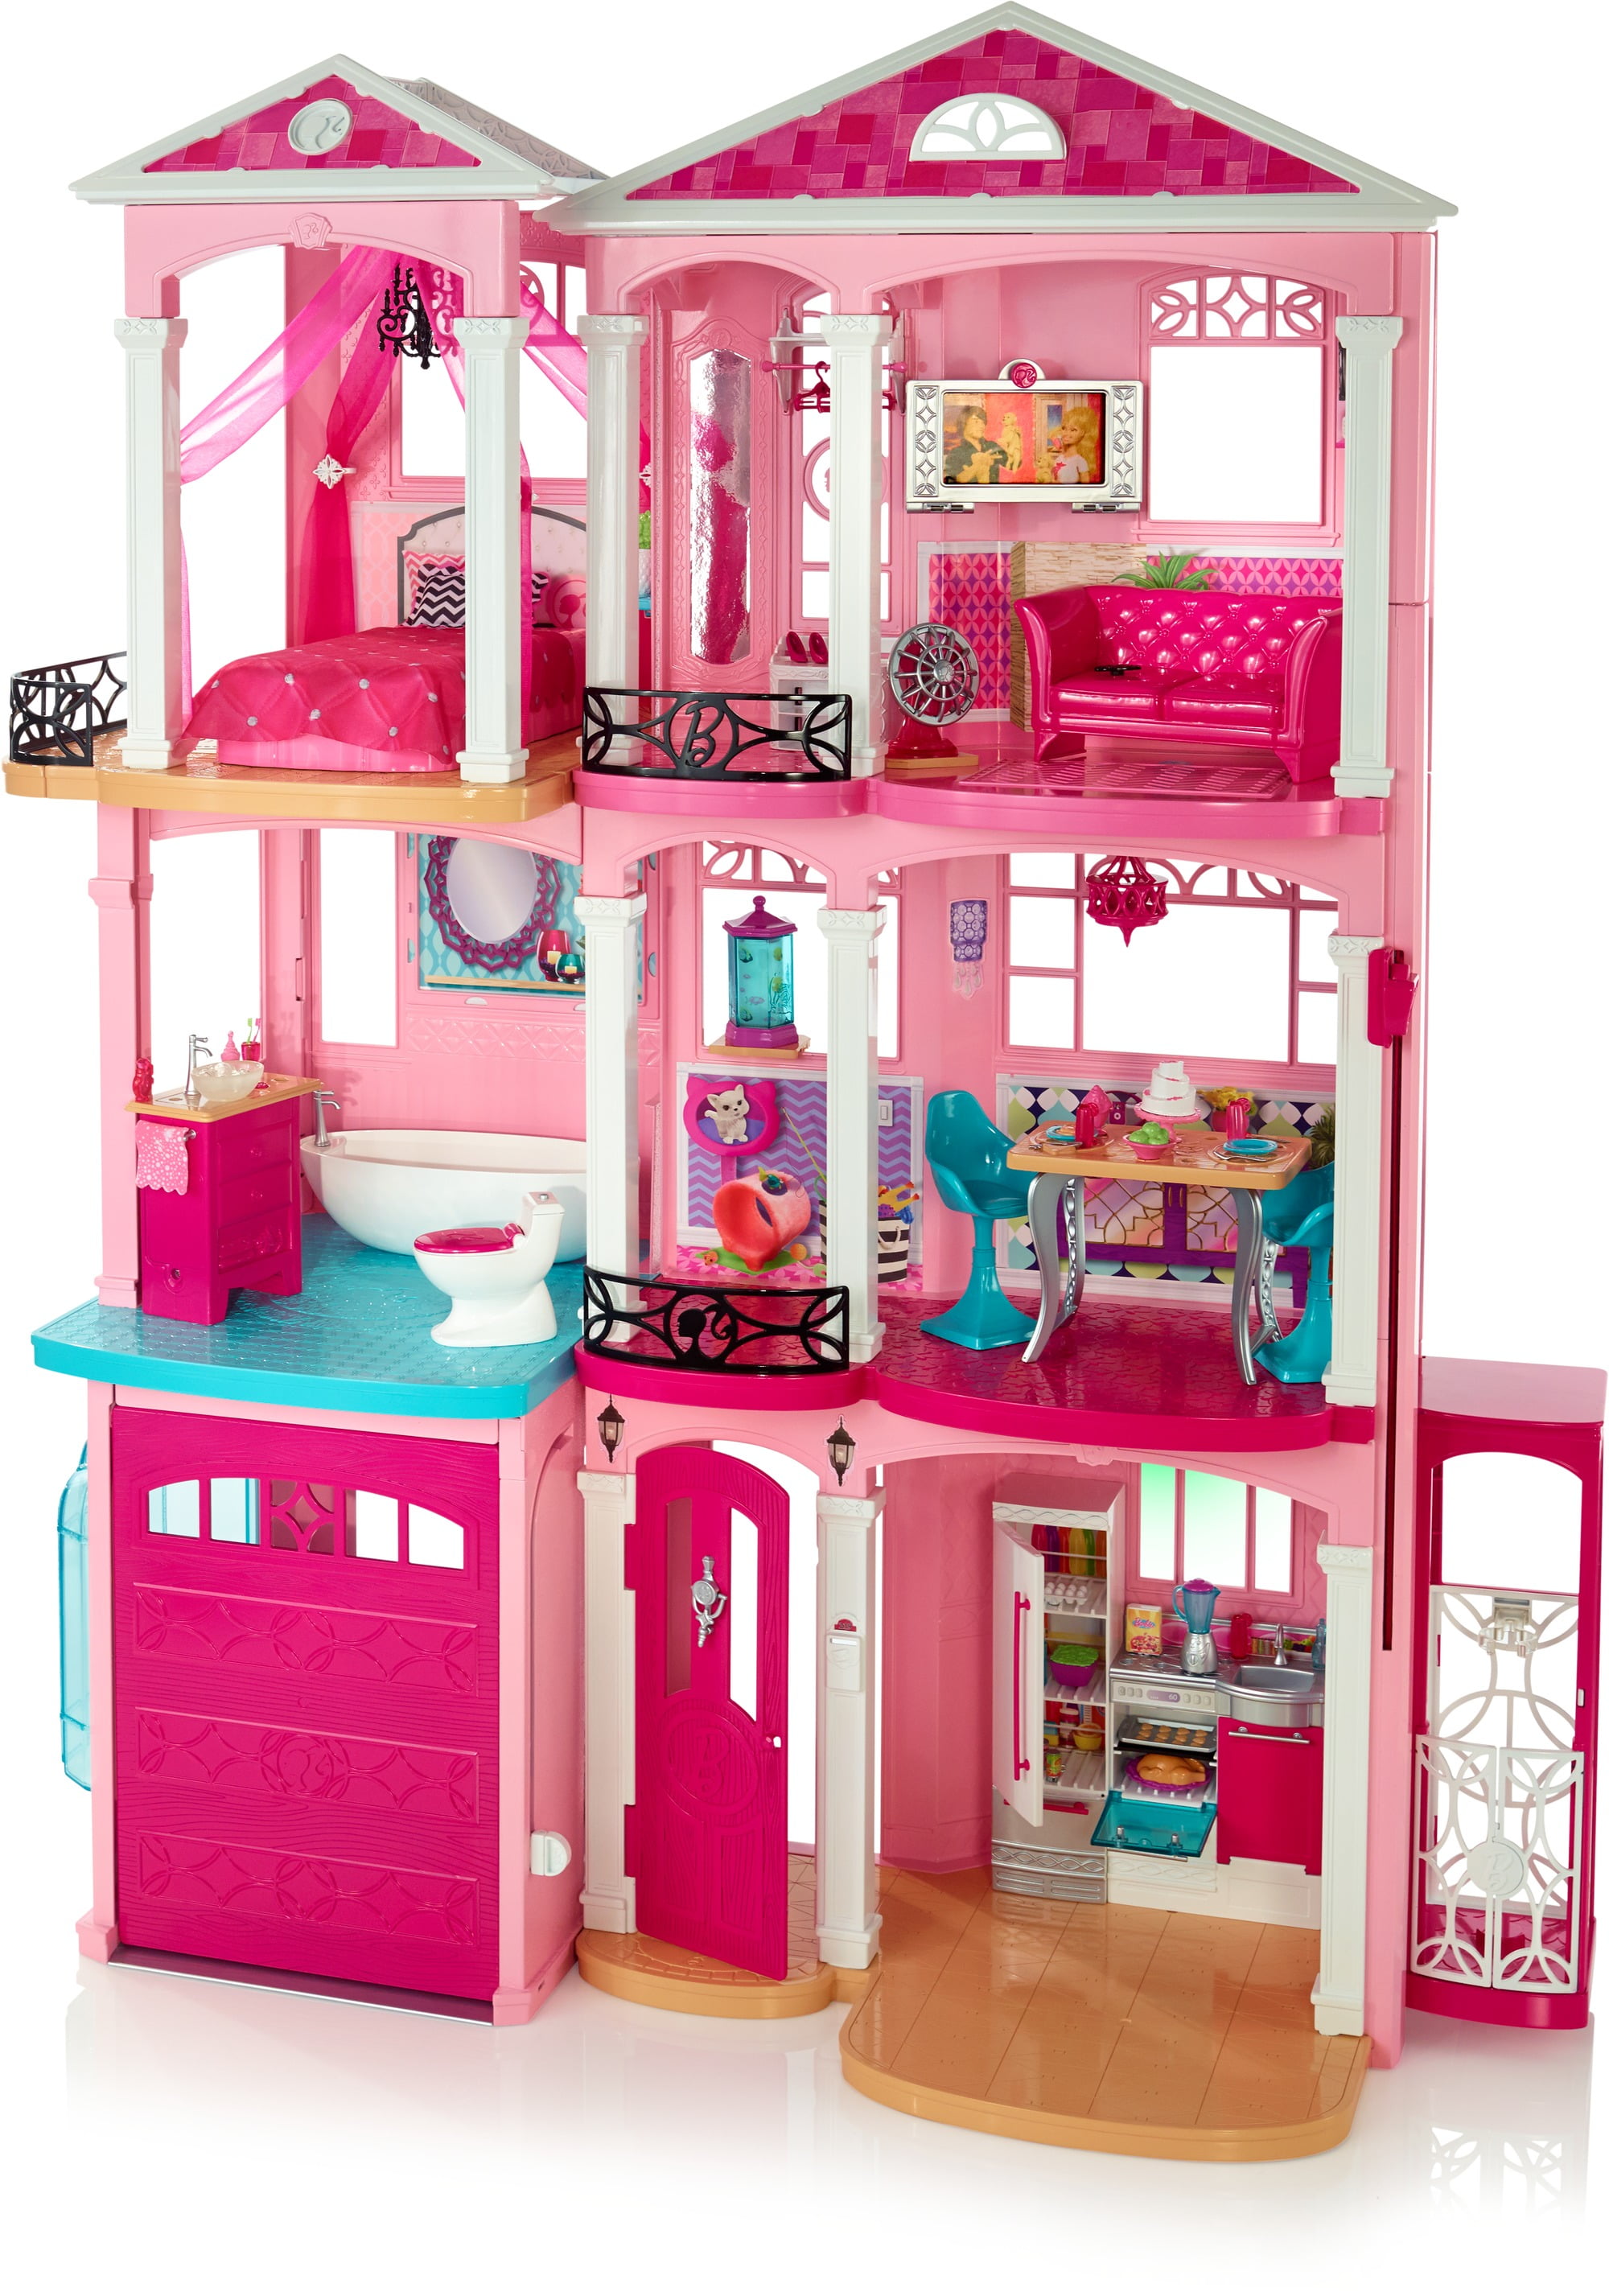 NEW Barbie DreamHouse Playset with 70 Accessory Pieces Girl Toy Gift 